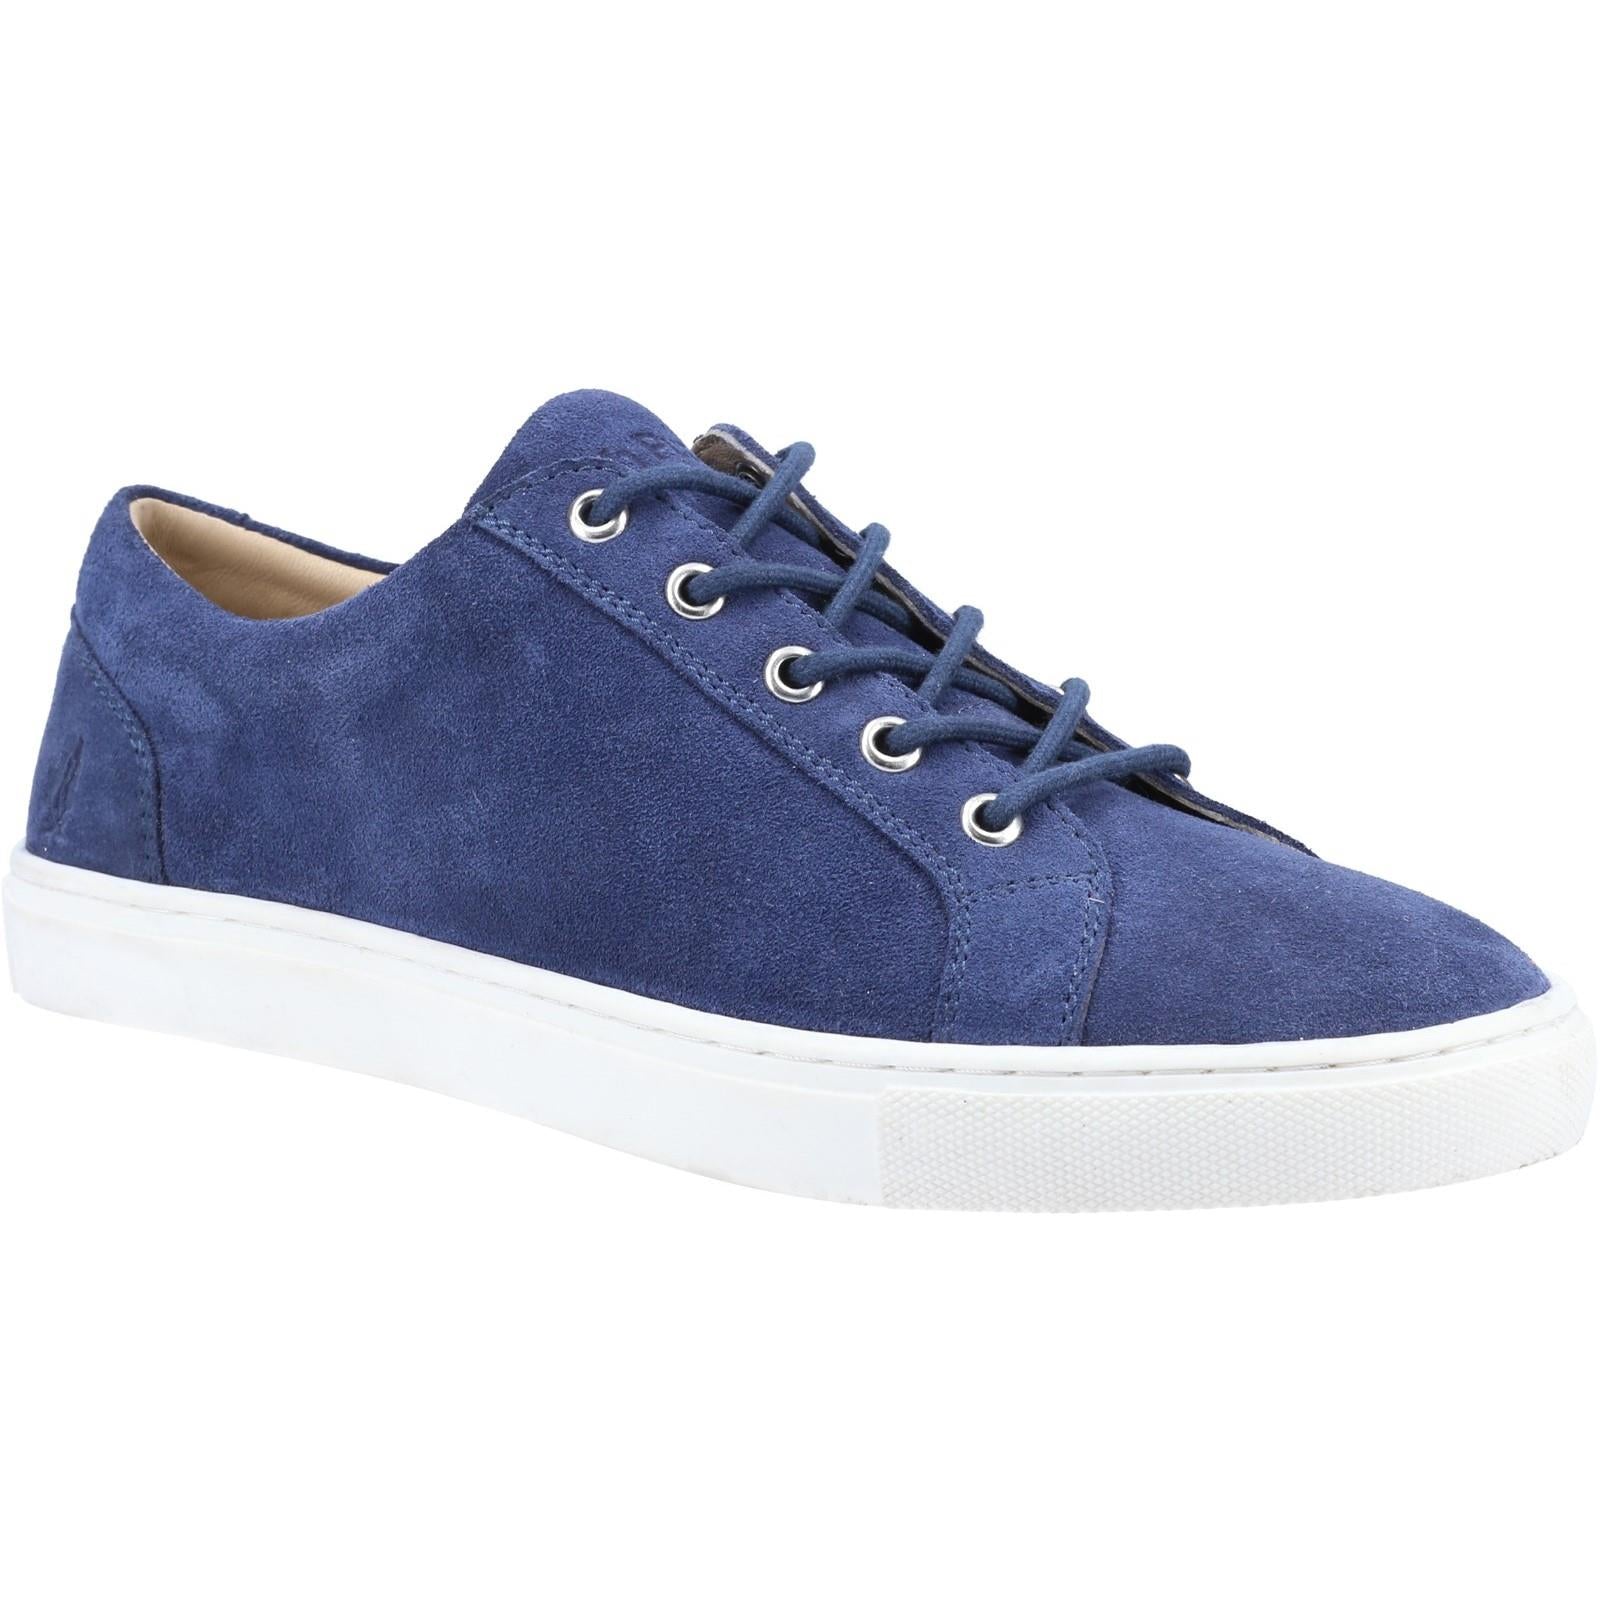 Hush Puppies Tessa navy blue suede ladies lace up sneakers trainers shoes